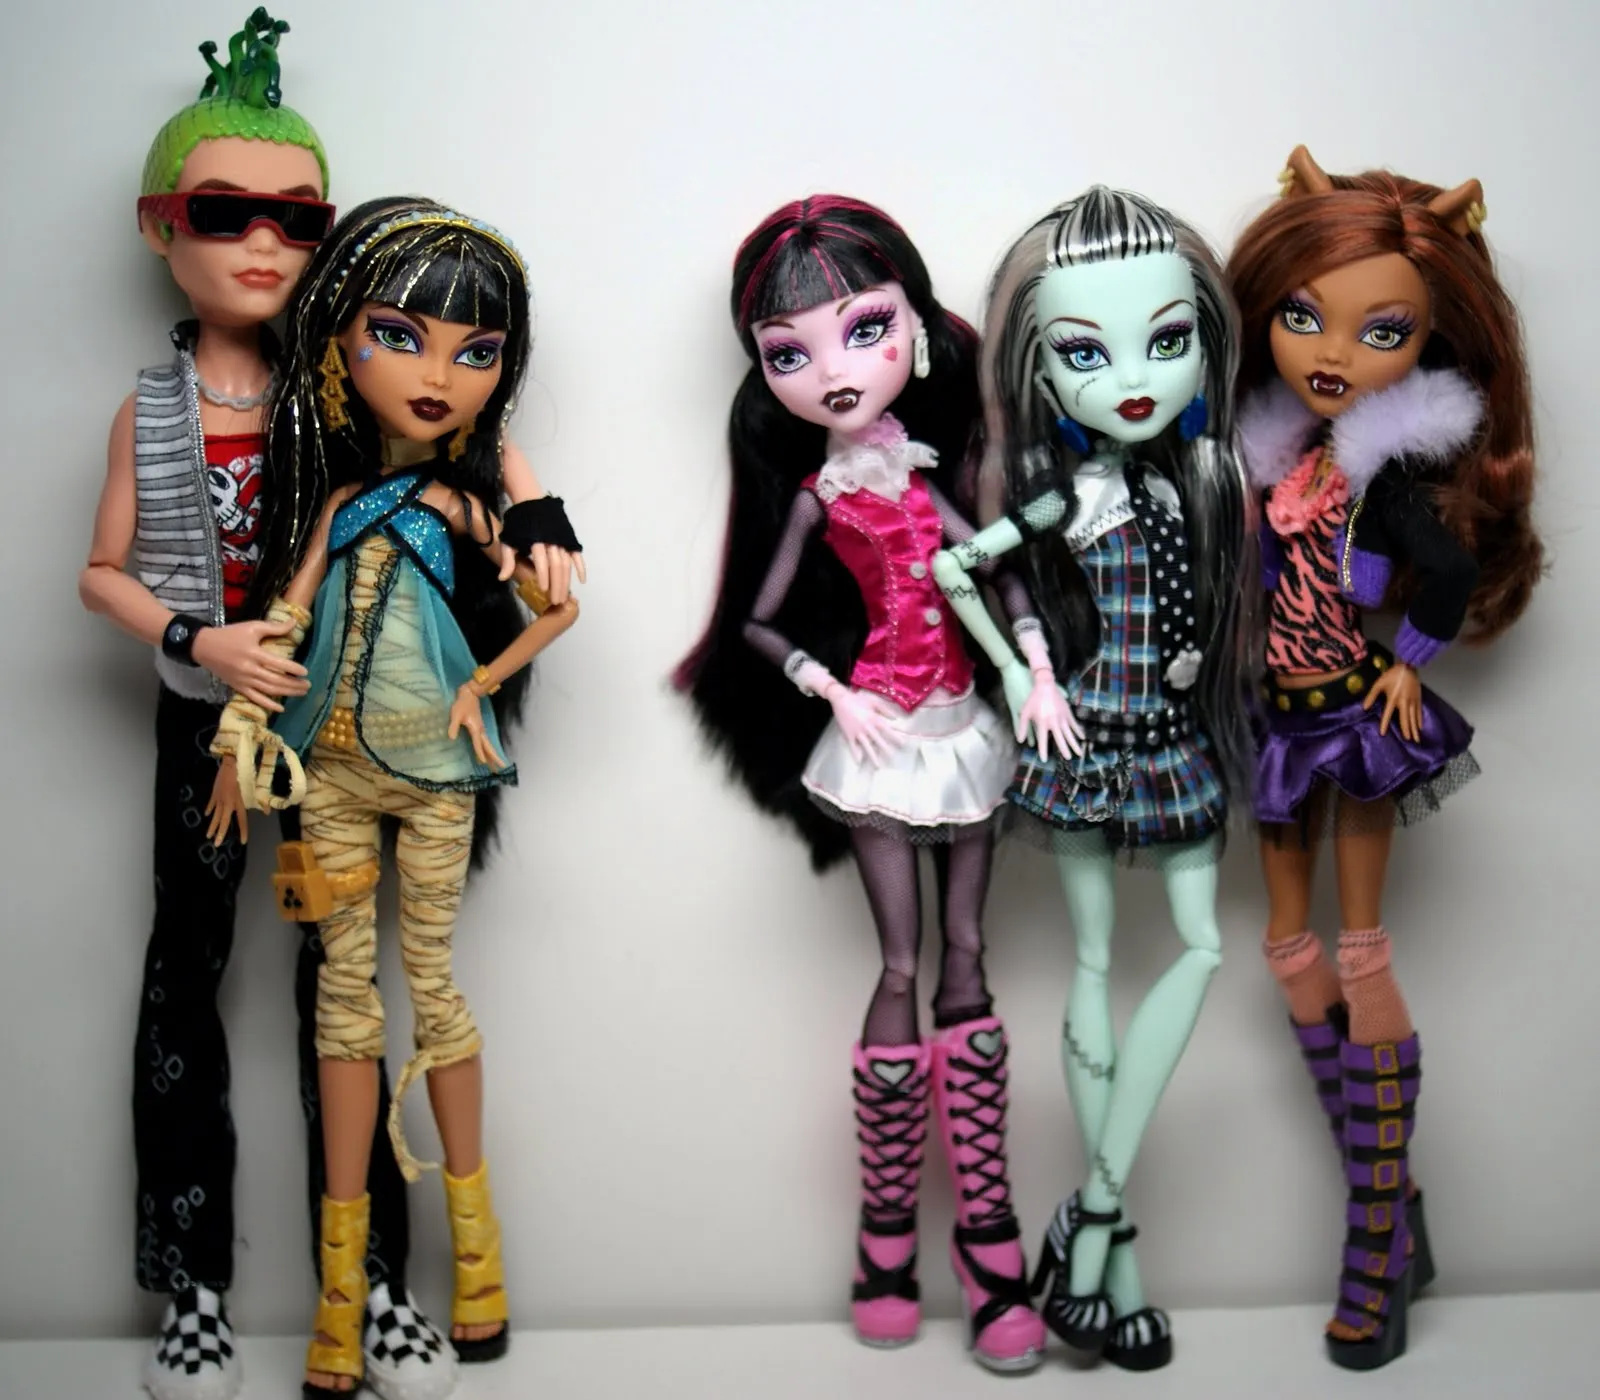 SYNTHIA.CA: Footage From "Monster High"